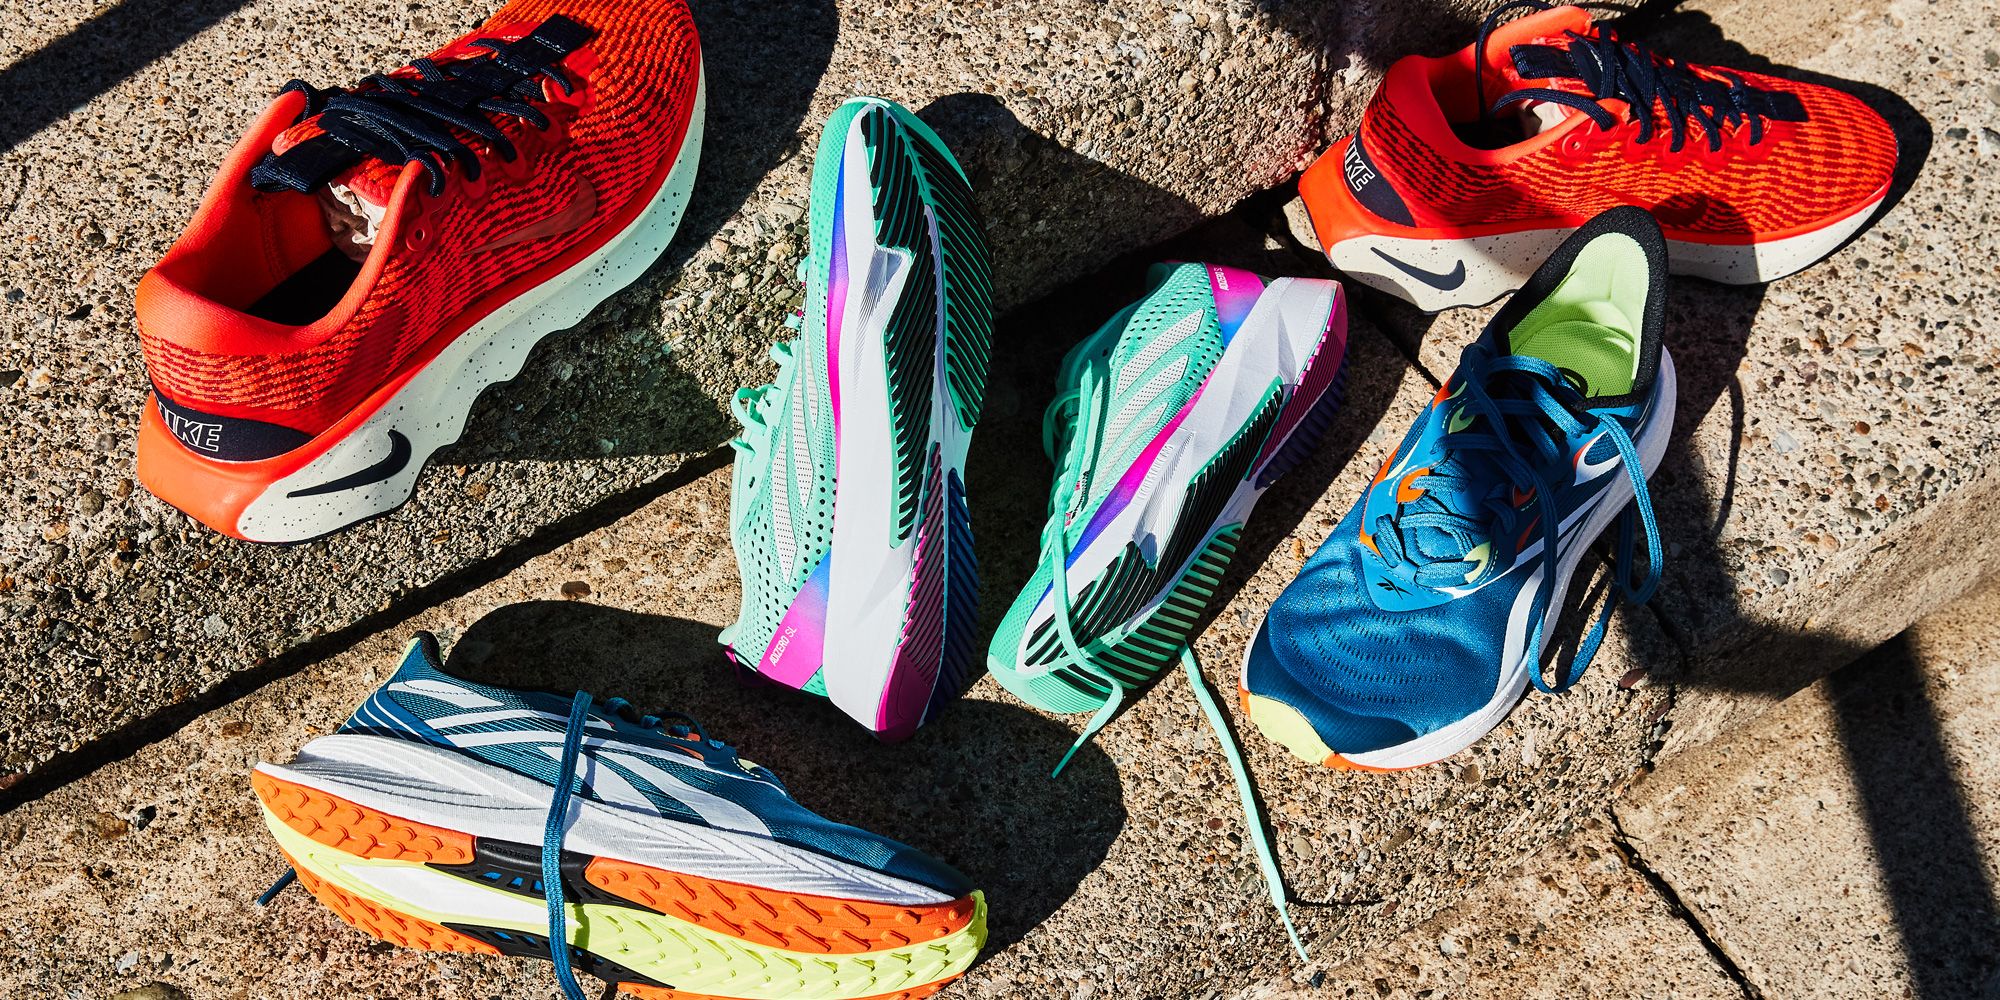 Choosing the Right Sports Shoes to Fit Your Activity